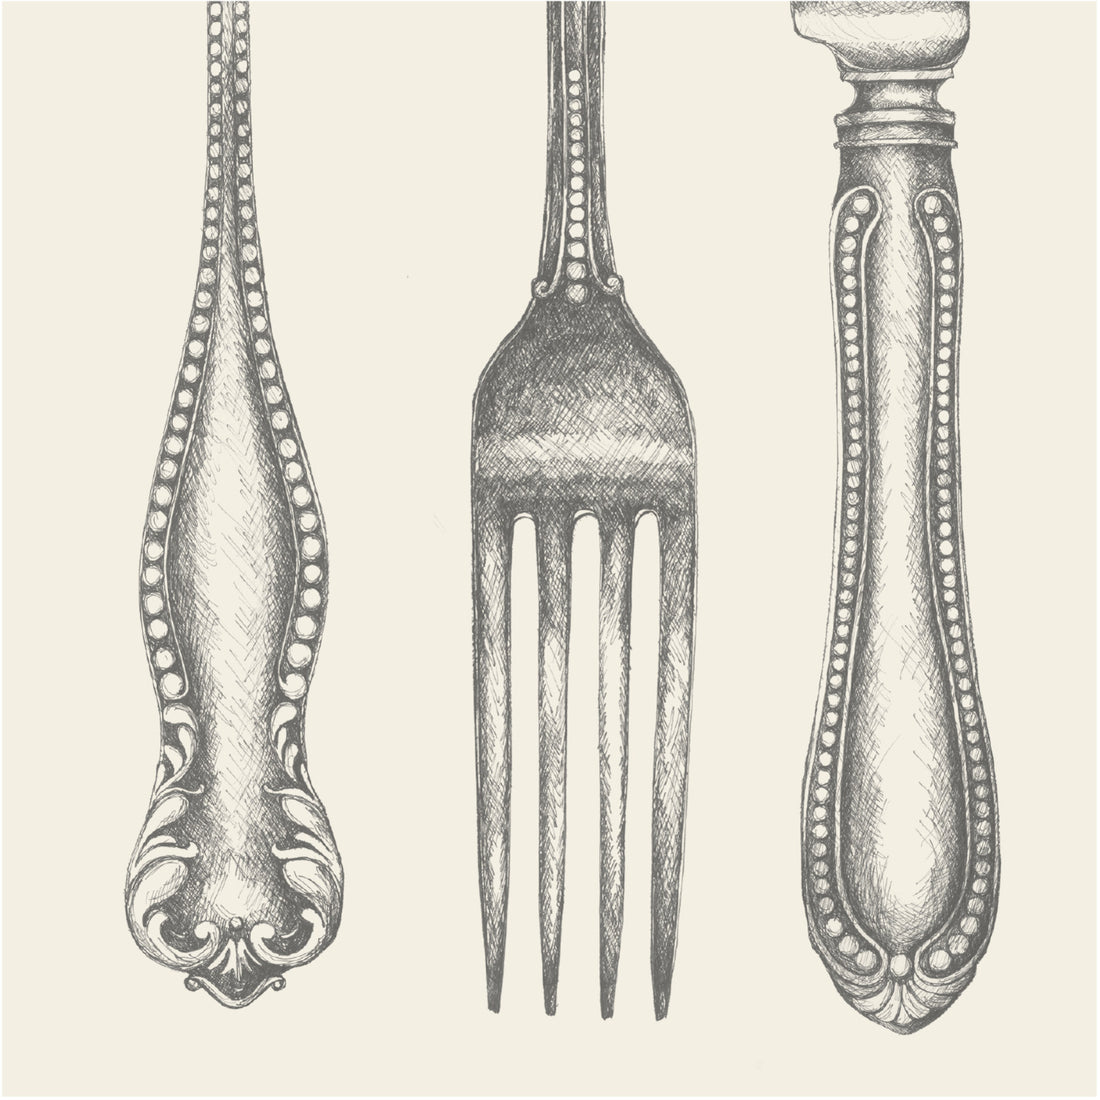 A square, cream cocktail napkin featuring grayscale pencil artwork of three pieces of silverware in a row: the handle of a spoon, the head of a fork, and the handle of a knife.